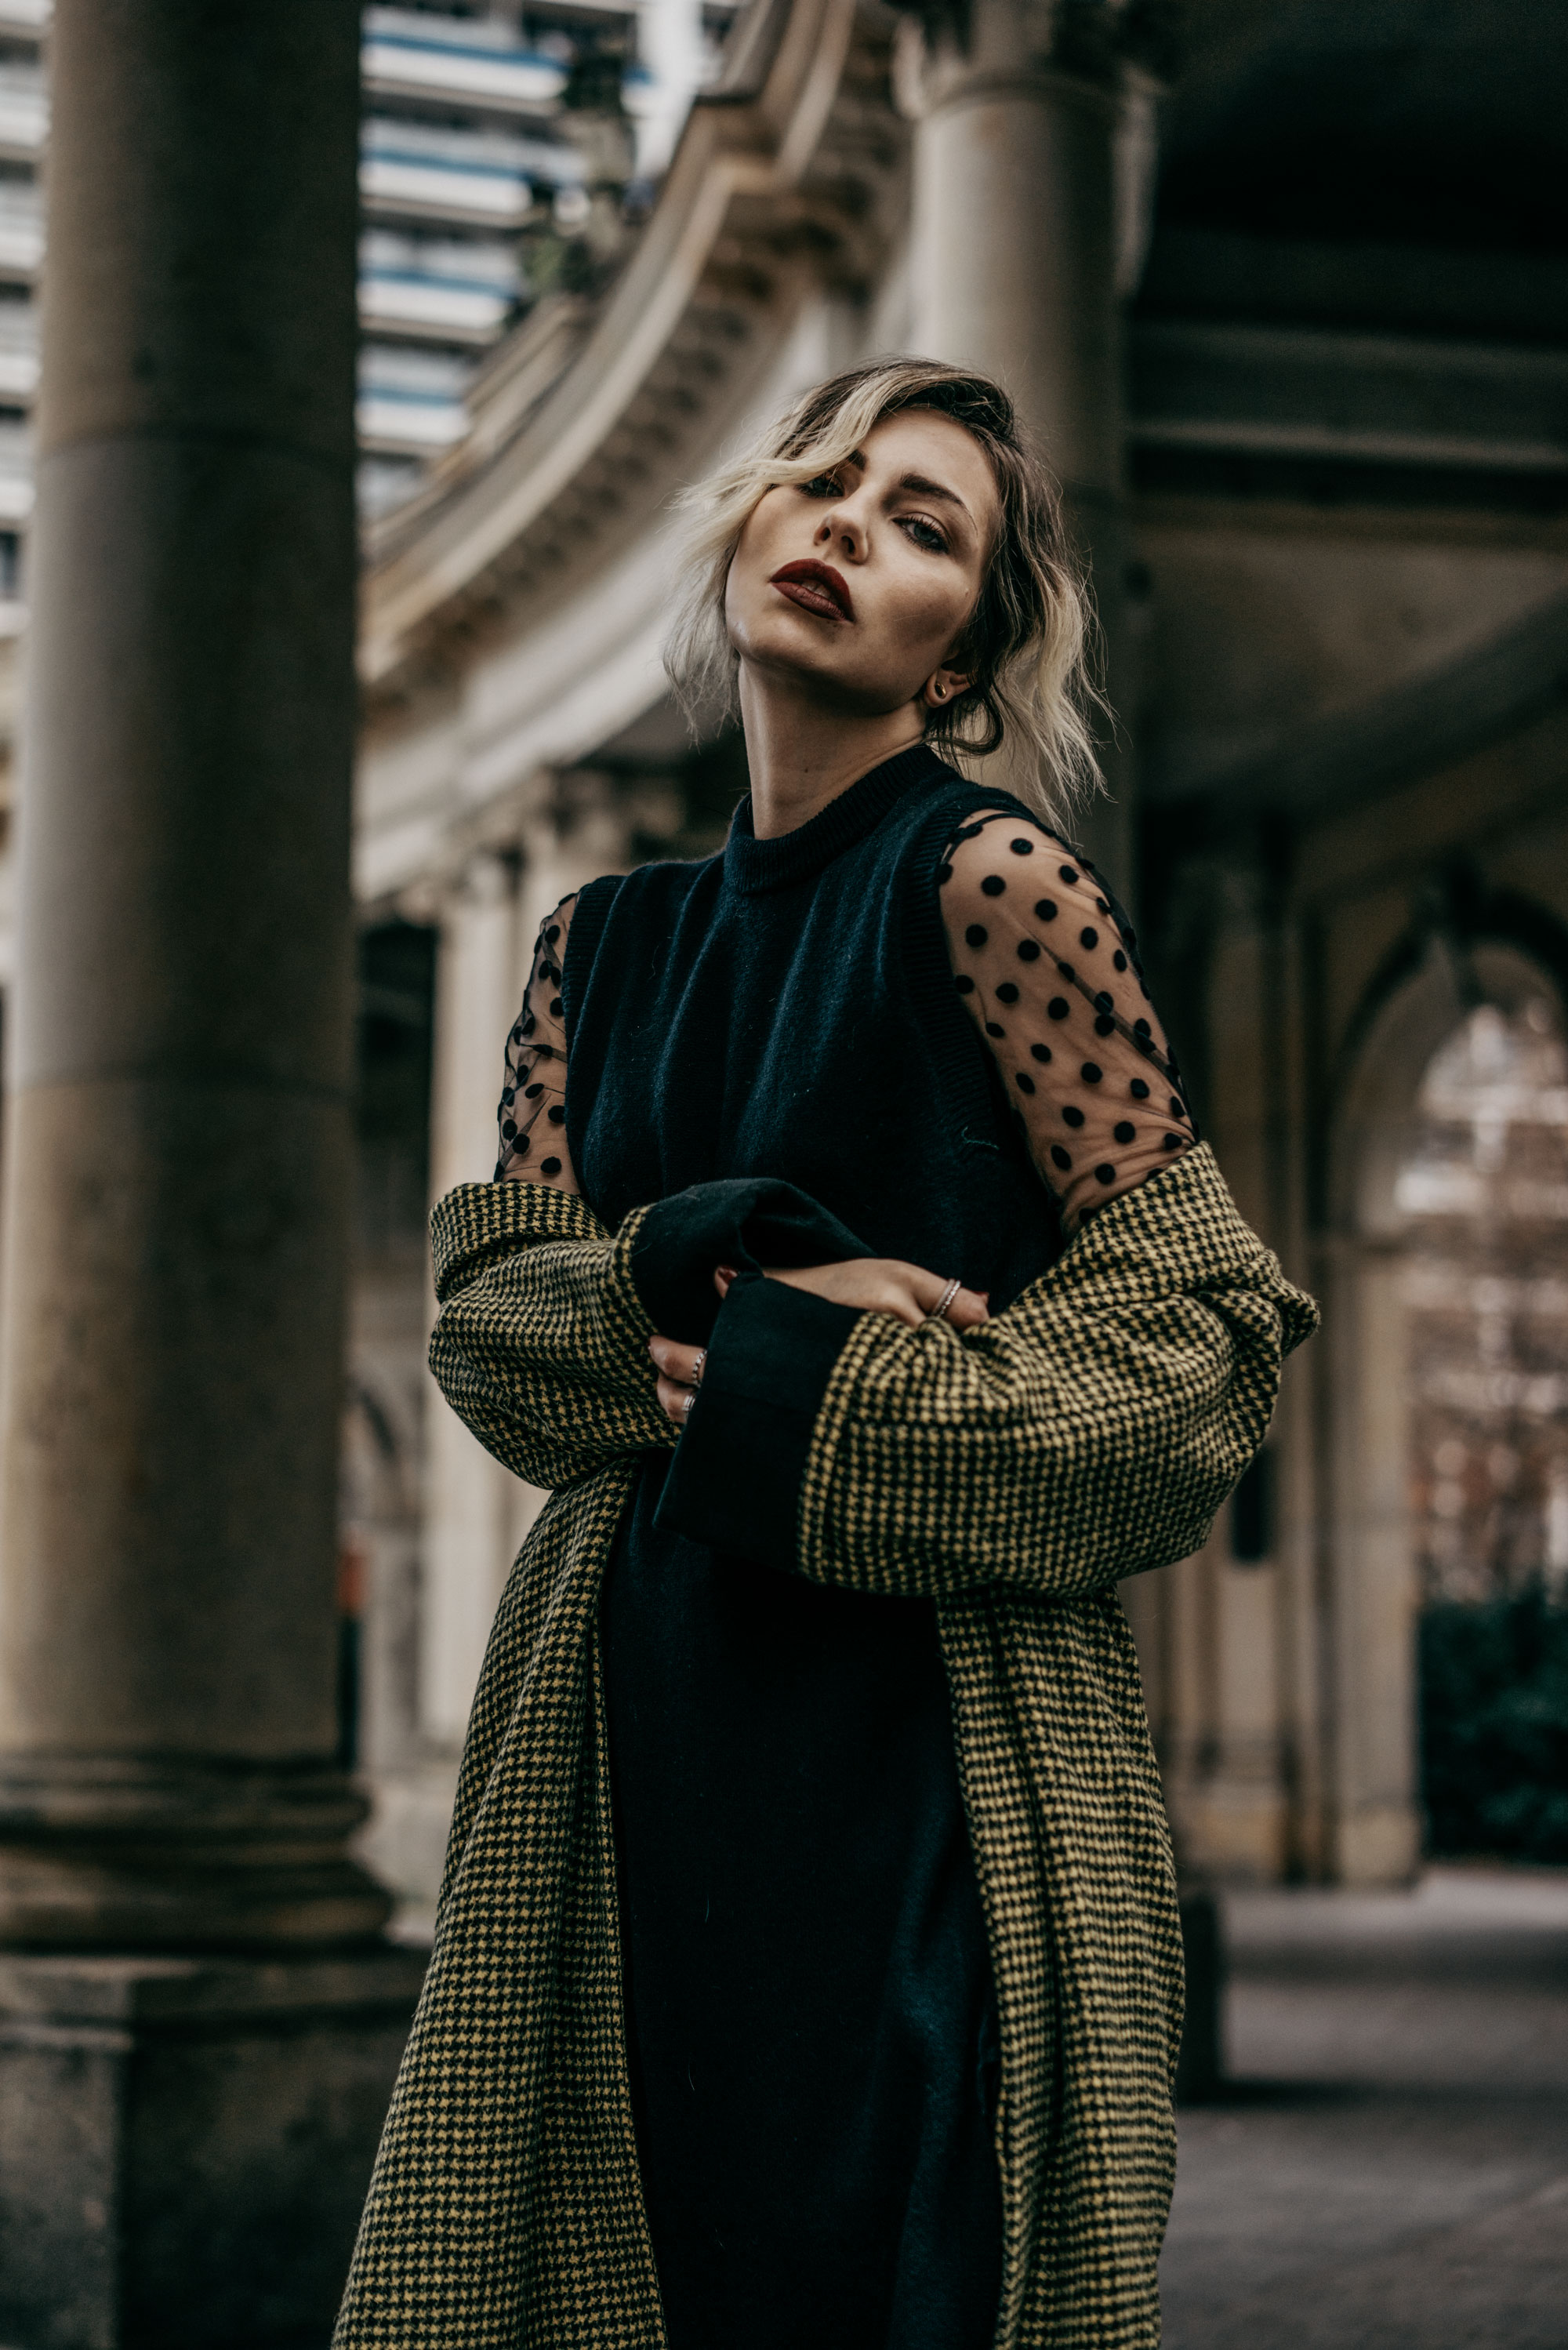 How to: Berlin street style | fashion & outfit | wearing: flat Christian Louboutin boots, dots dress, Haider Ackermann coat, small Fendi double Baguette bag